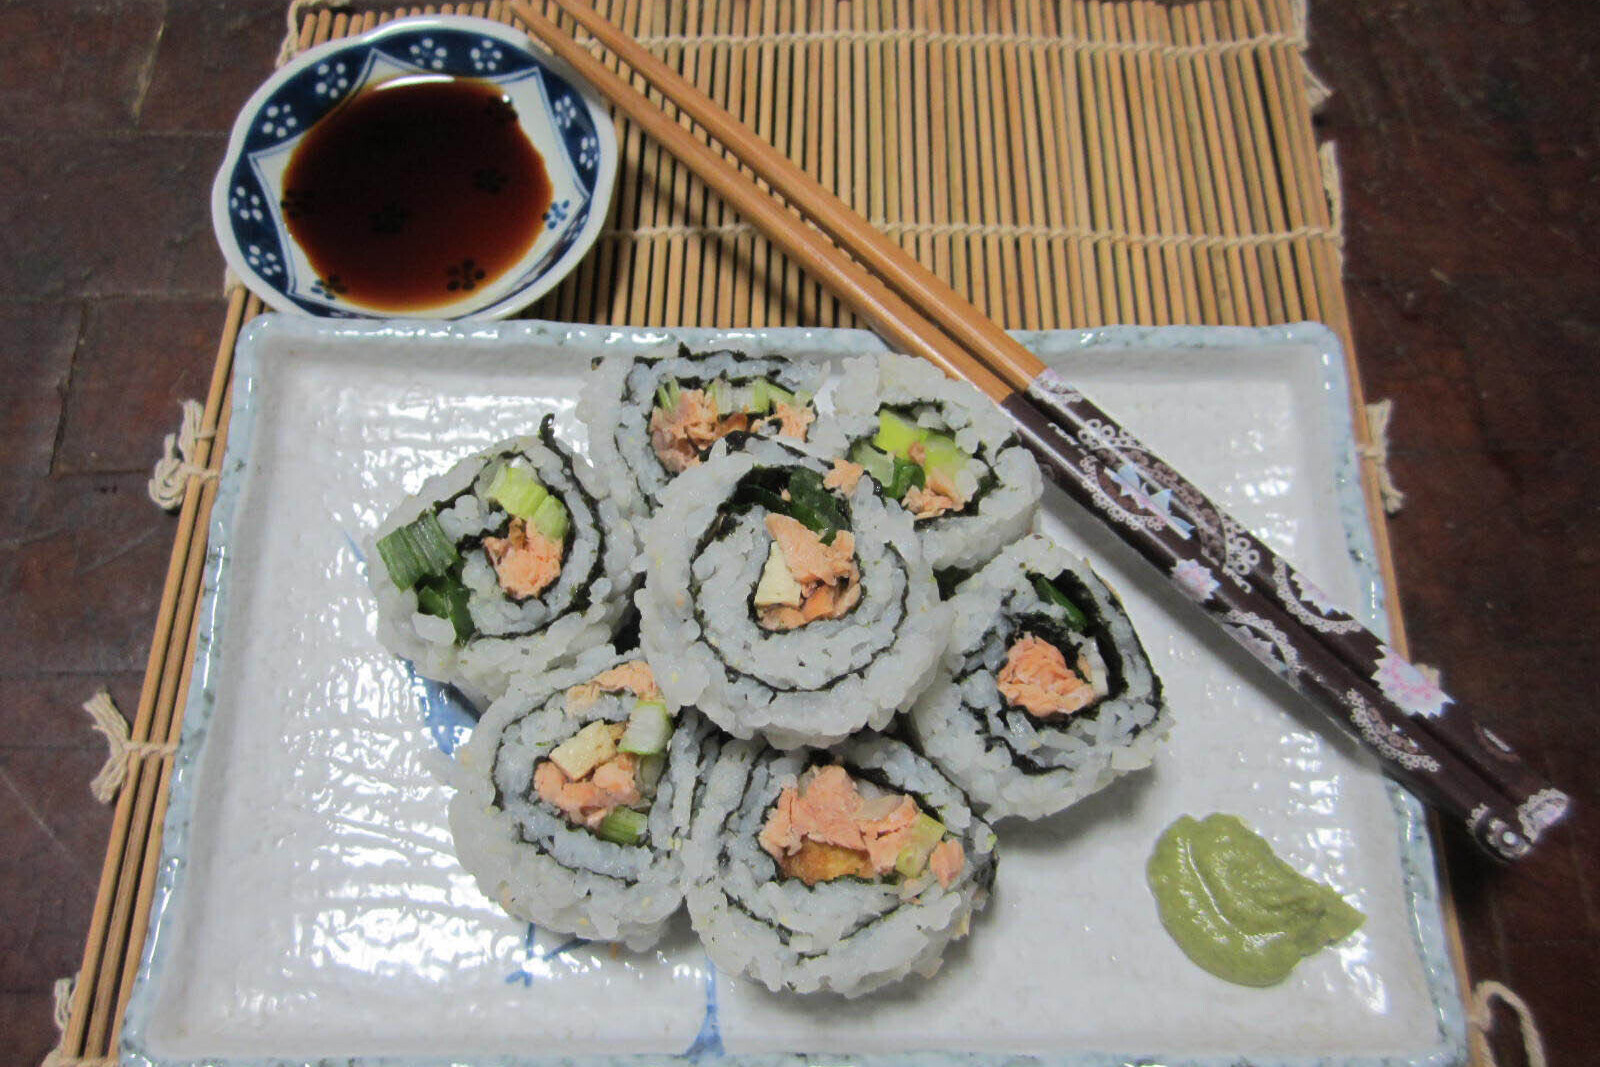 Nori rolls served with soy sauce and Wasabi